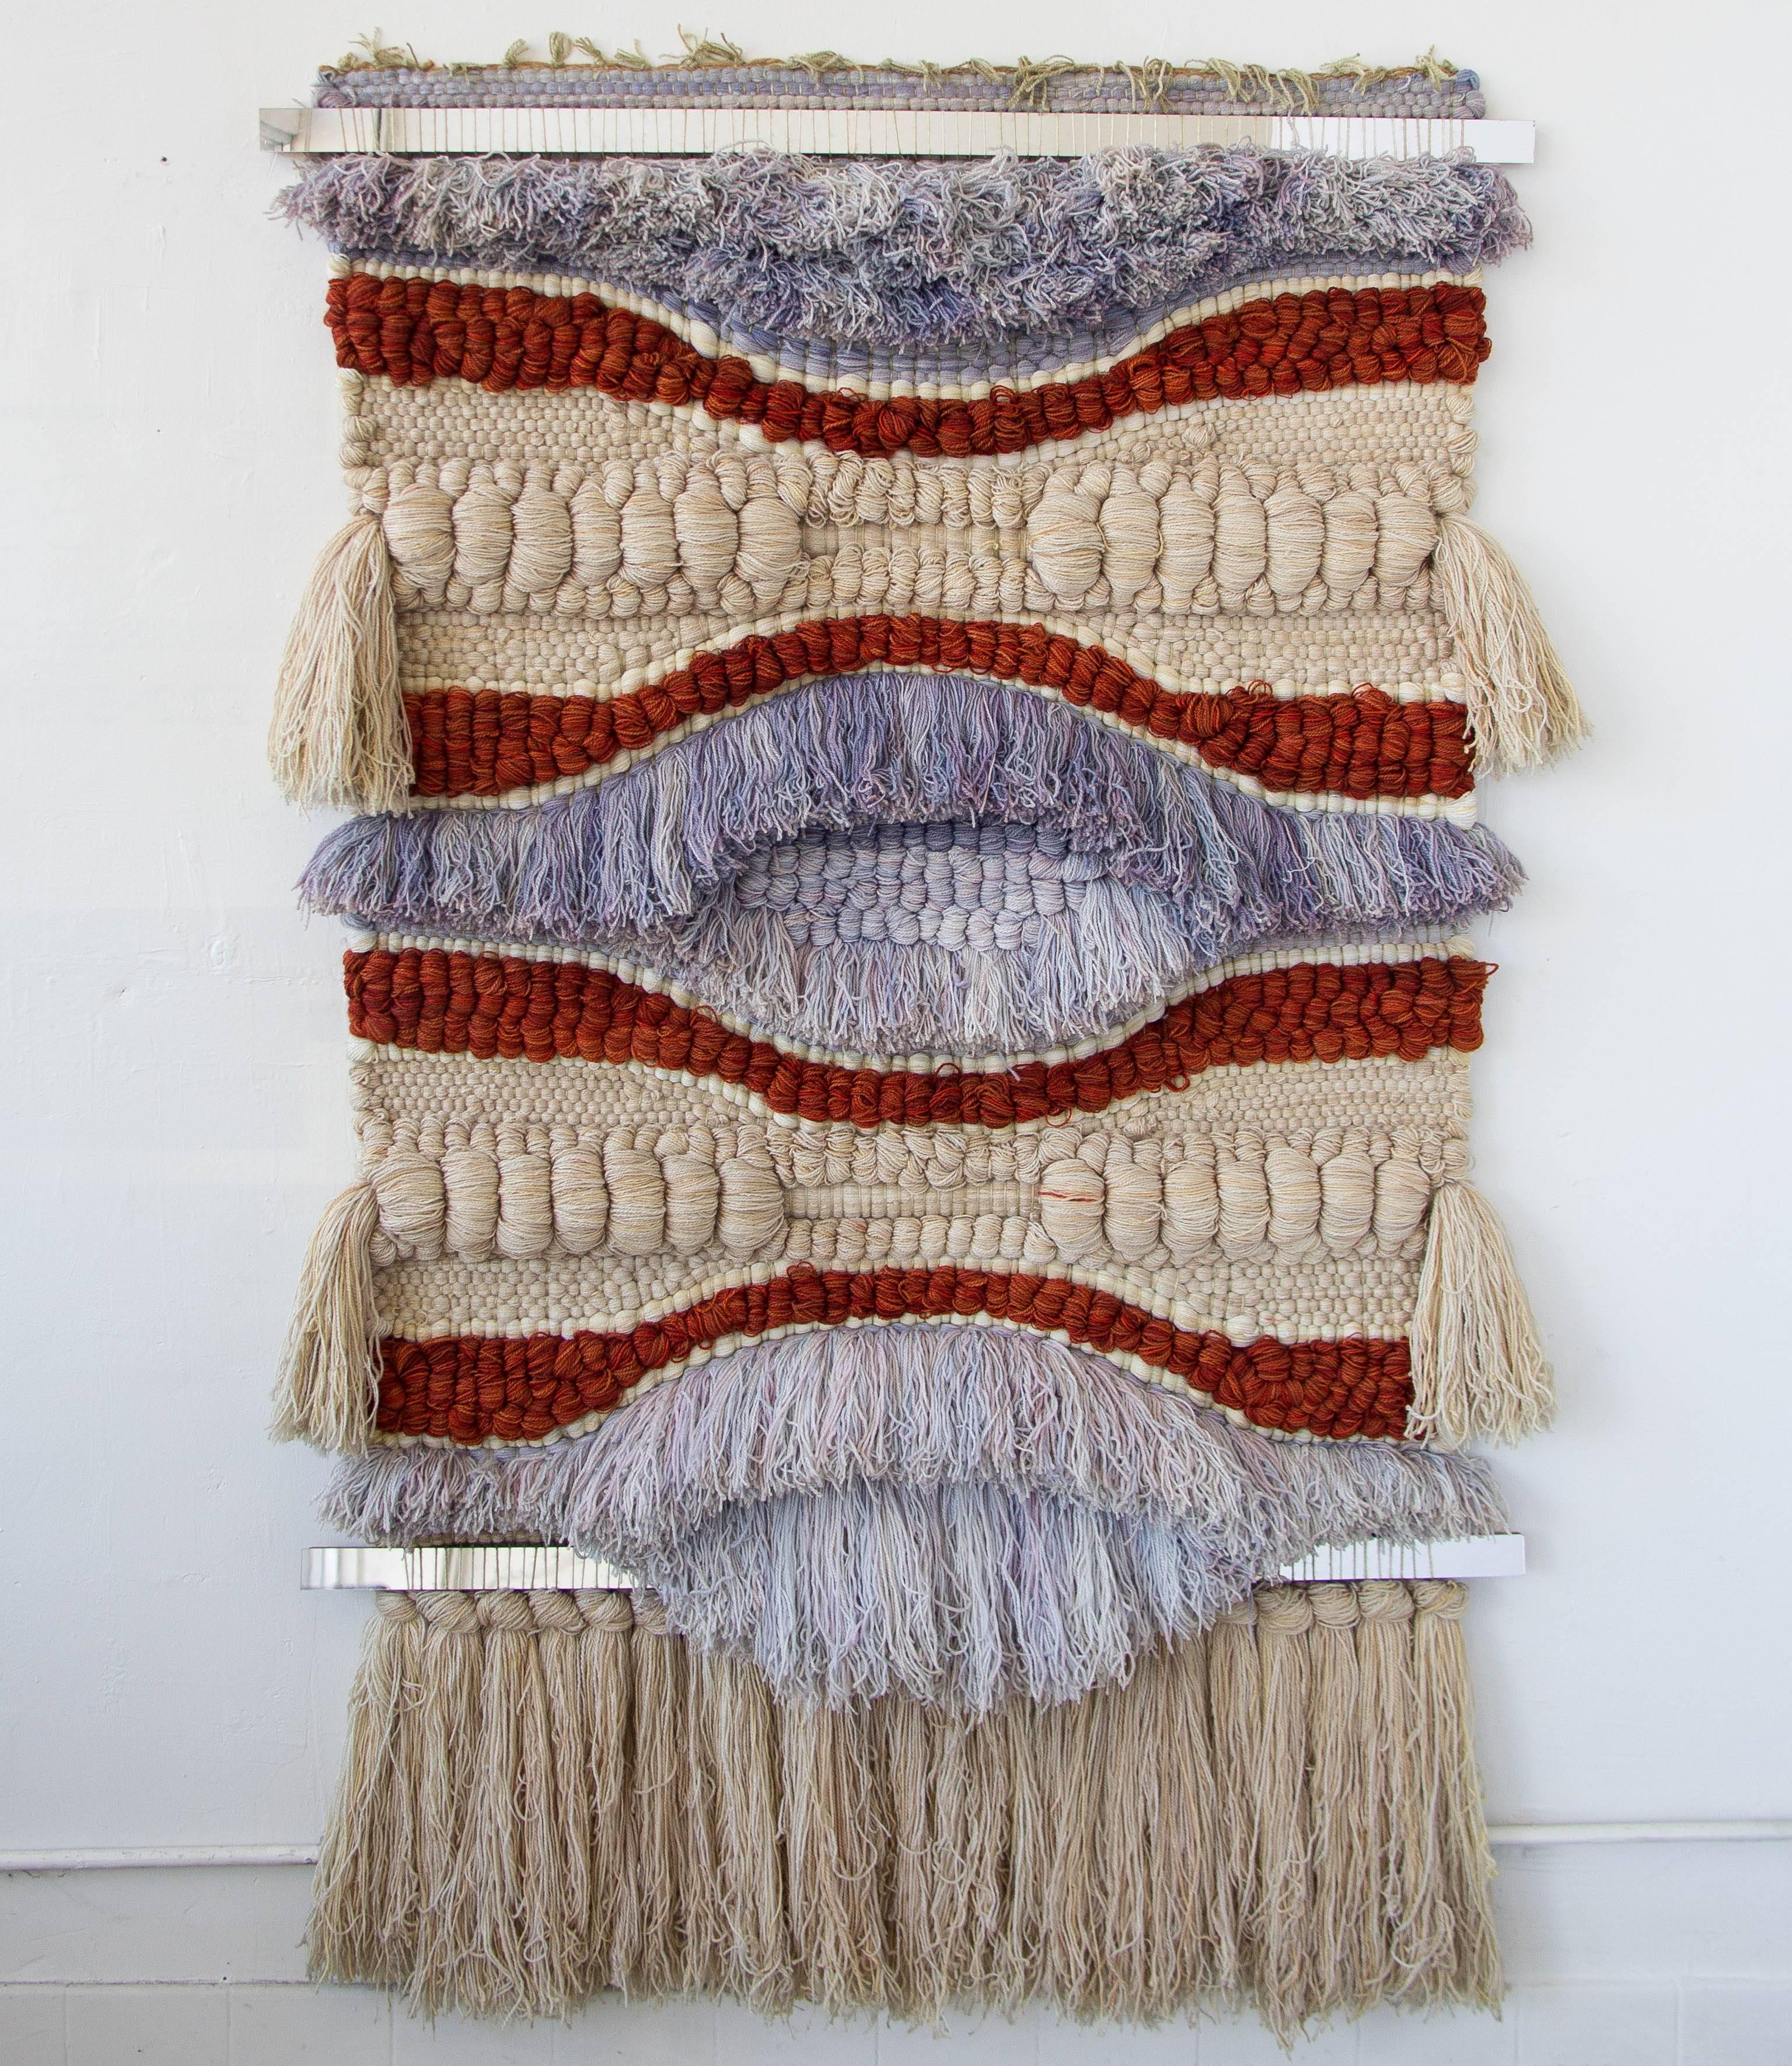 Monumental wall hanging by Margo Farrin O’Connor for Ted Morris & Associates. Produced in California in the 1970s, this piece of handwoven and dyed fibers is typical of O’Connor’s large-scale biomorphic motifs. Each end is supported by a strip